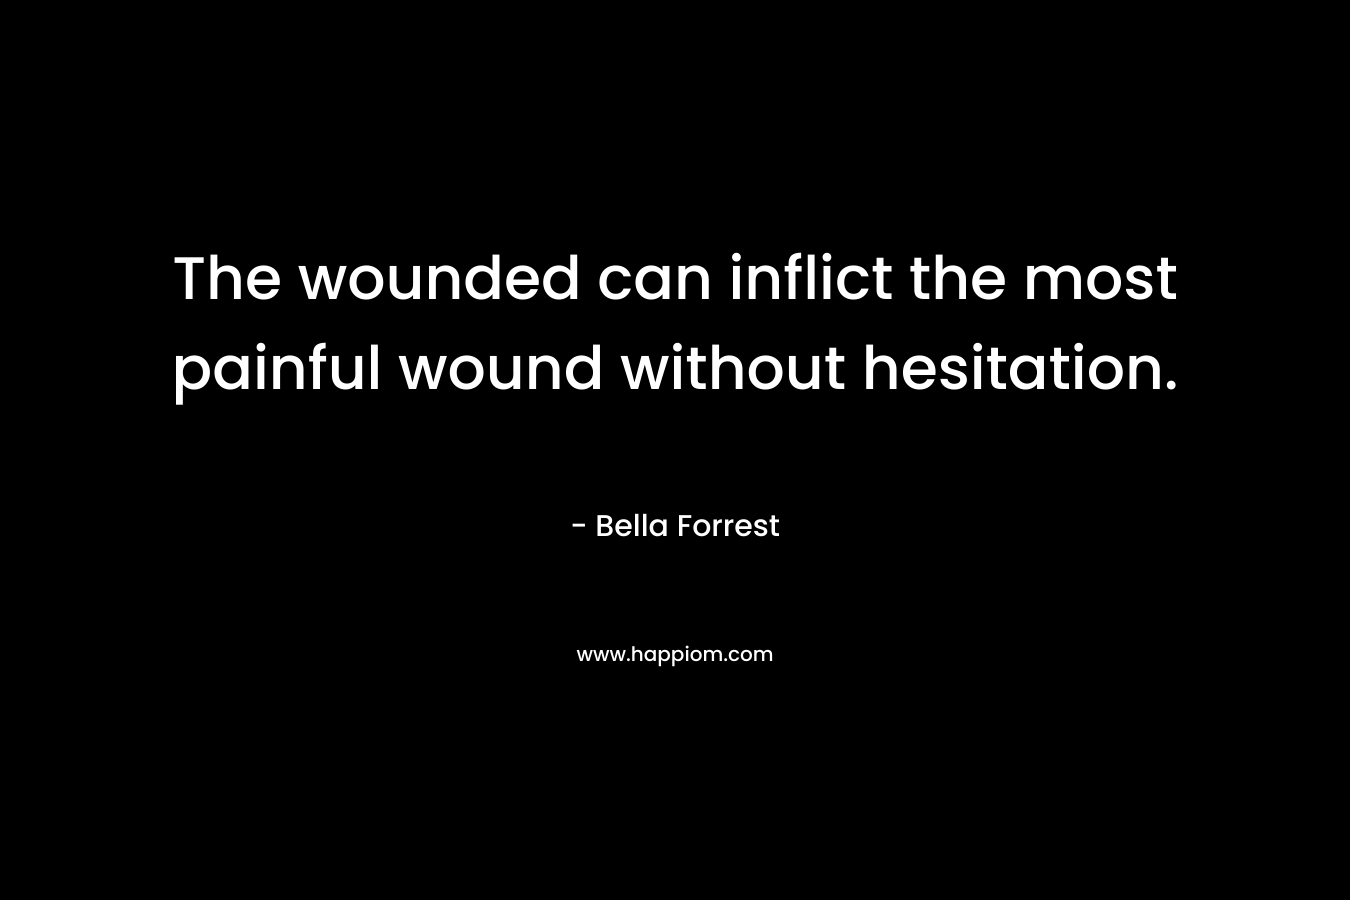 The wounded can inflict the most painful wound without hesitation. – Bella Forrest